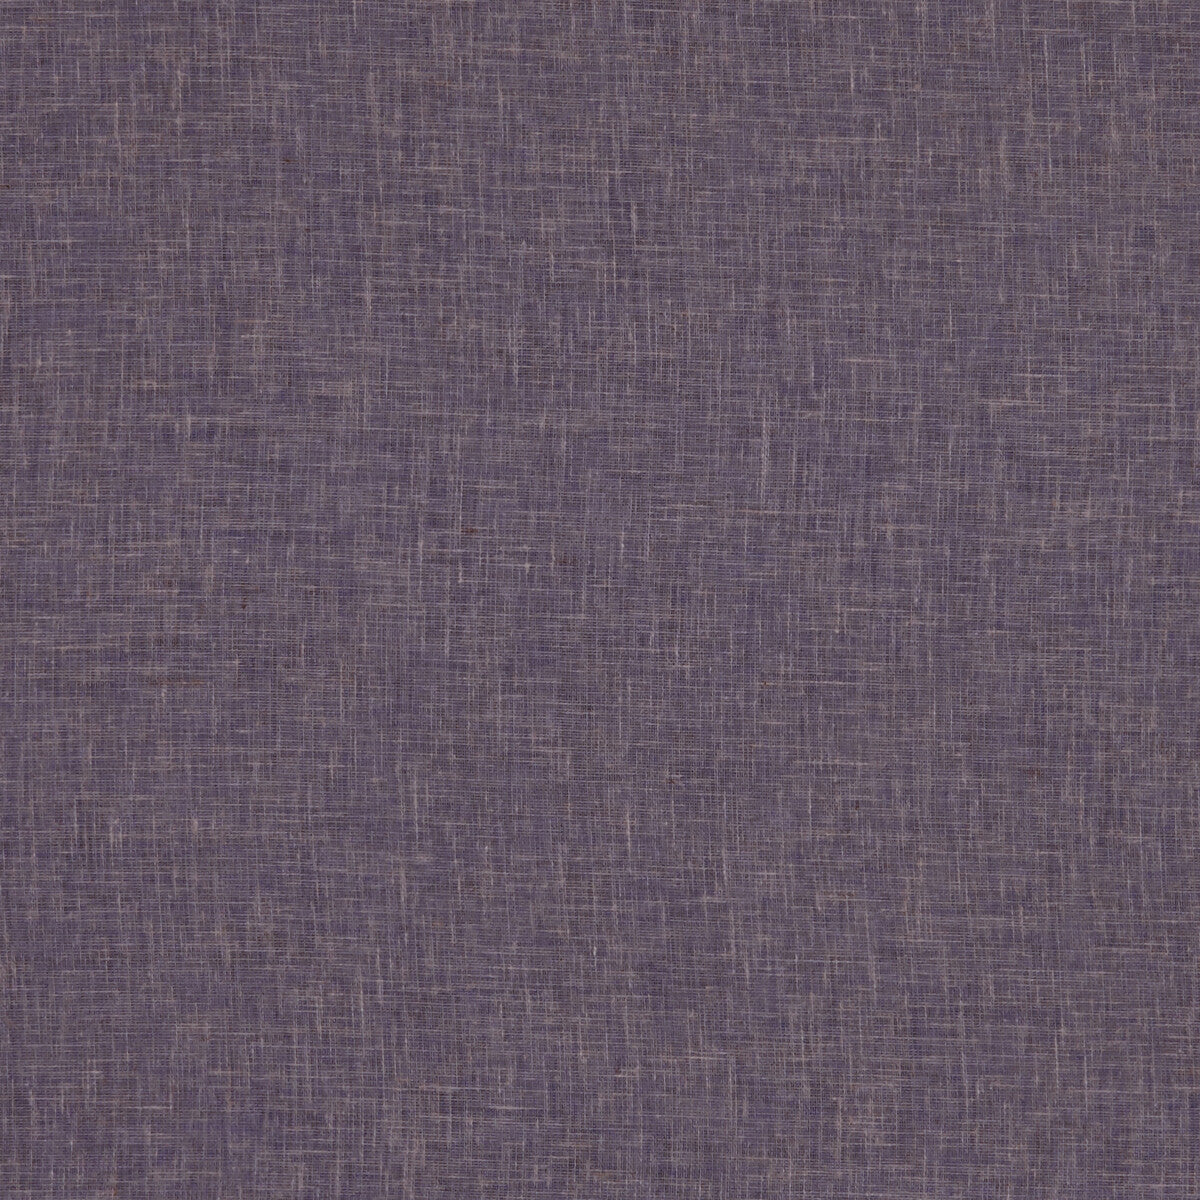 Midori fabric in heather color - pattern F1068/19.CAC.0 - by Clarke And Clarke in the Clarke &amp; Clarke Midori collection